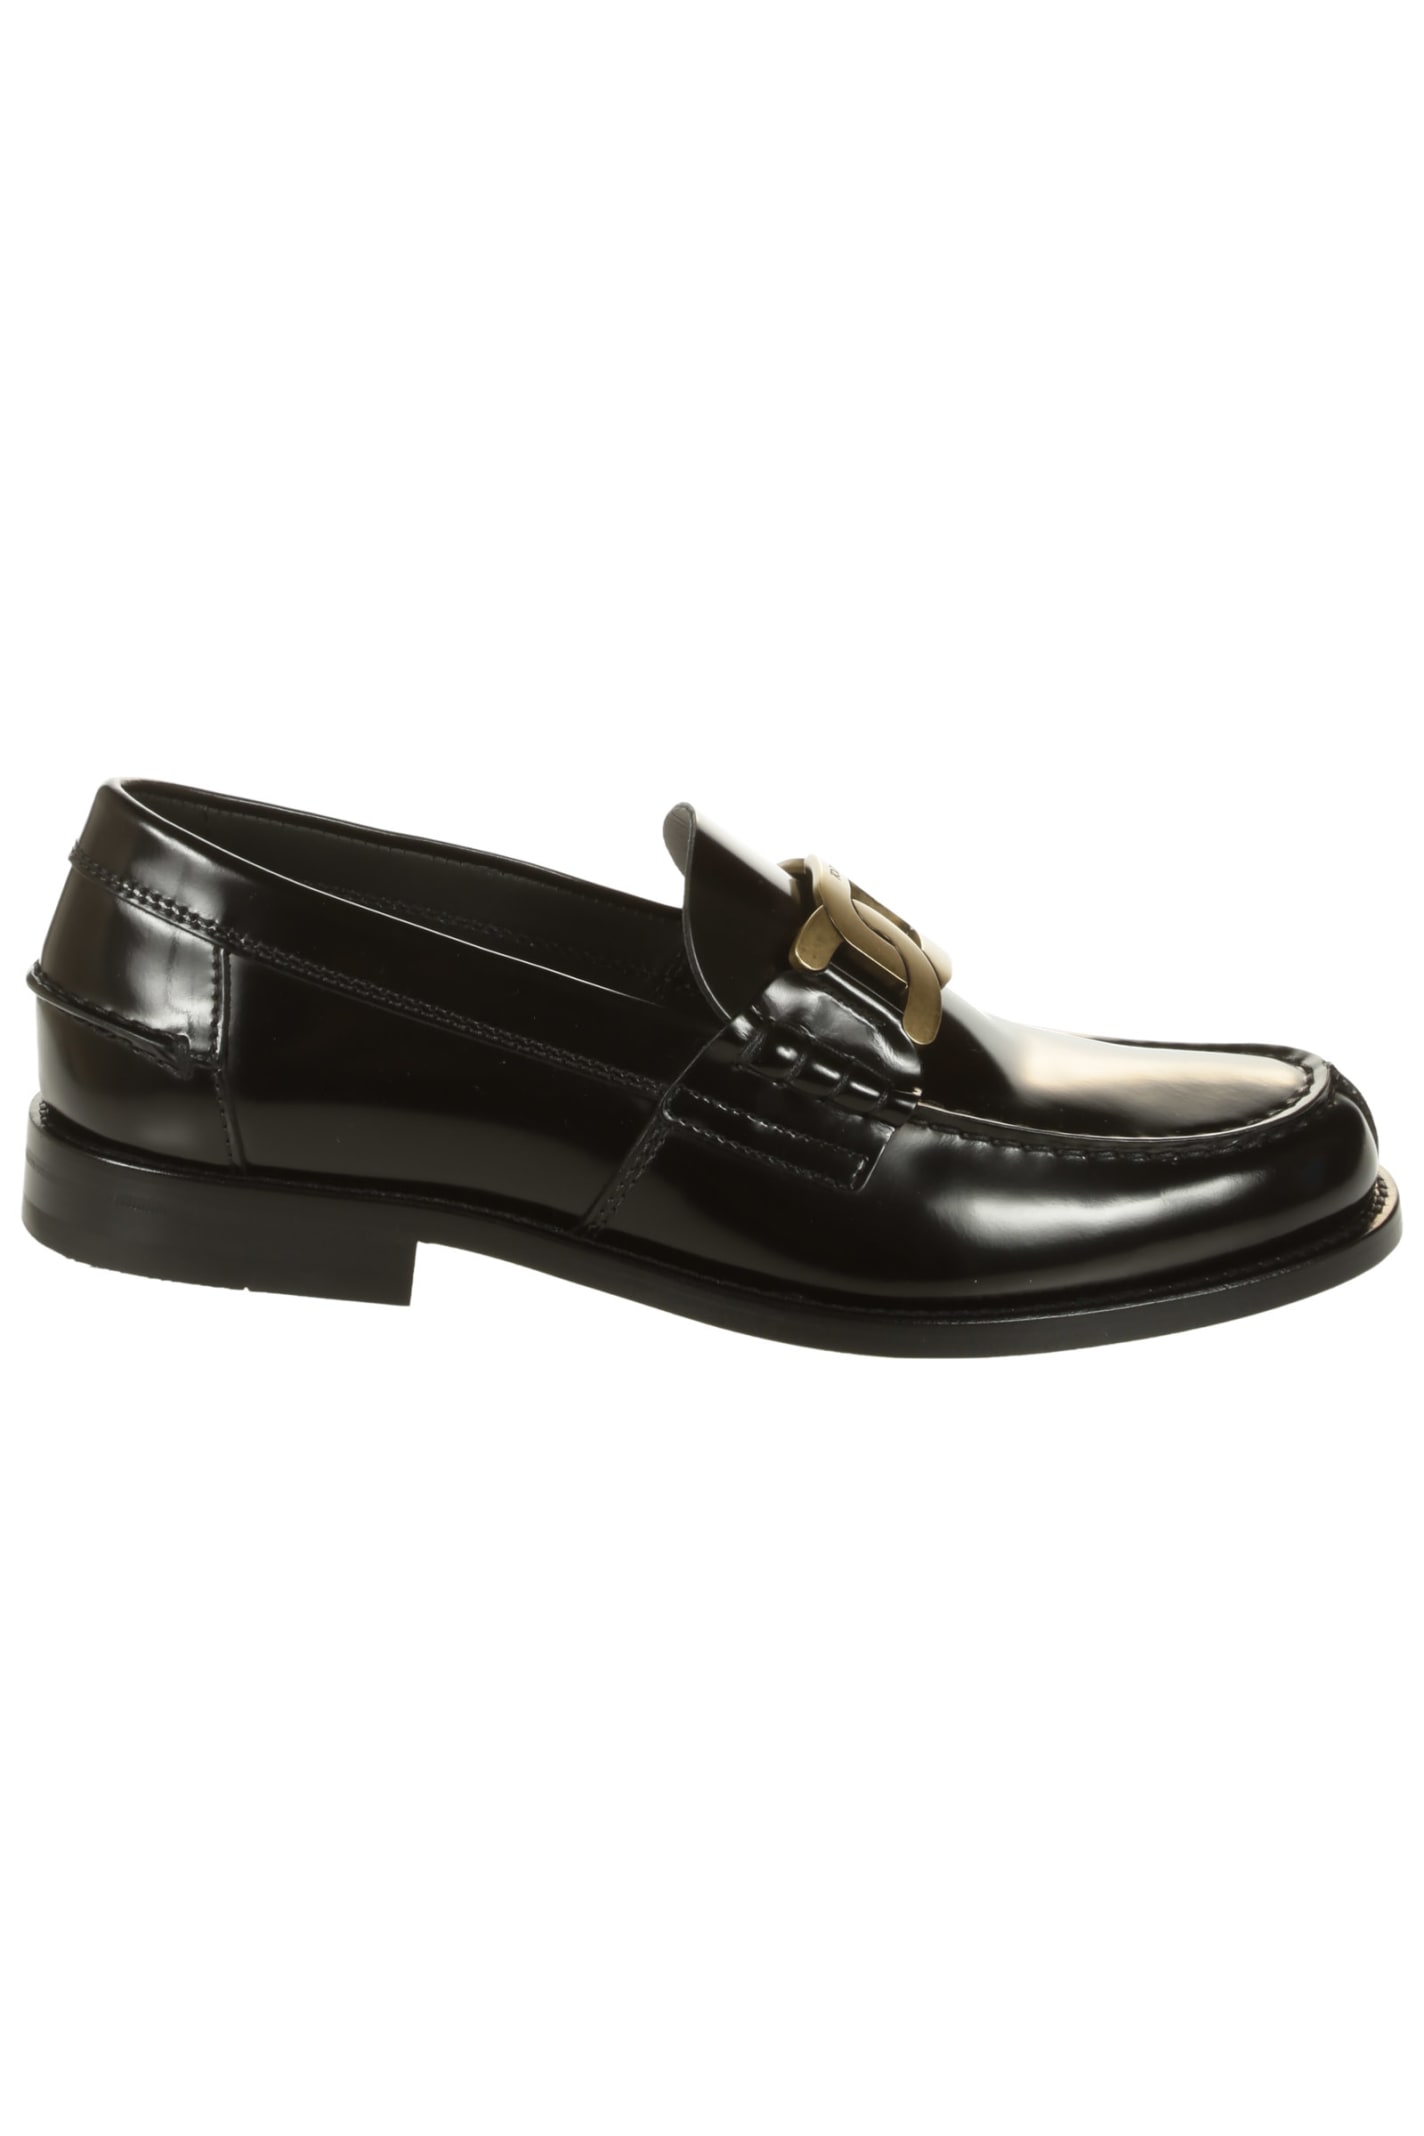 Tods Logo Embossed Loafers